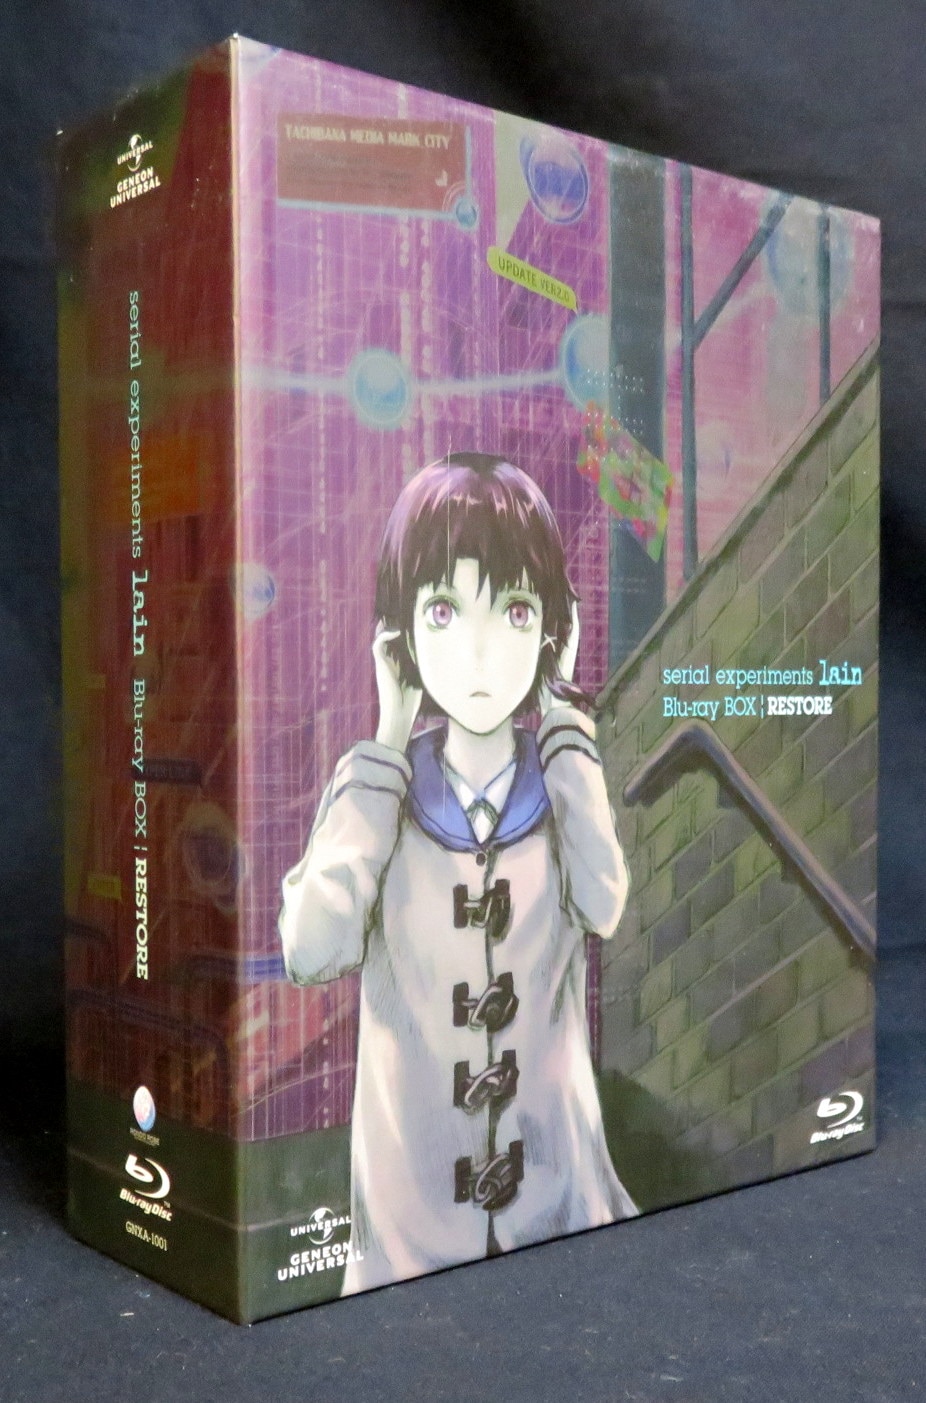 serial experiments lain Blu-ray Box∣rest